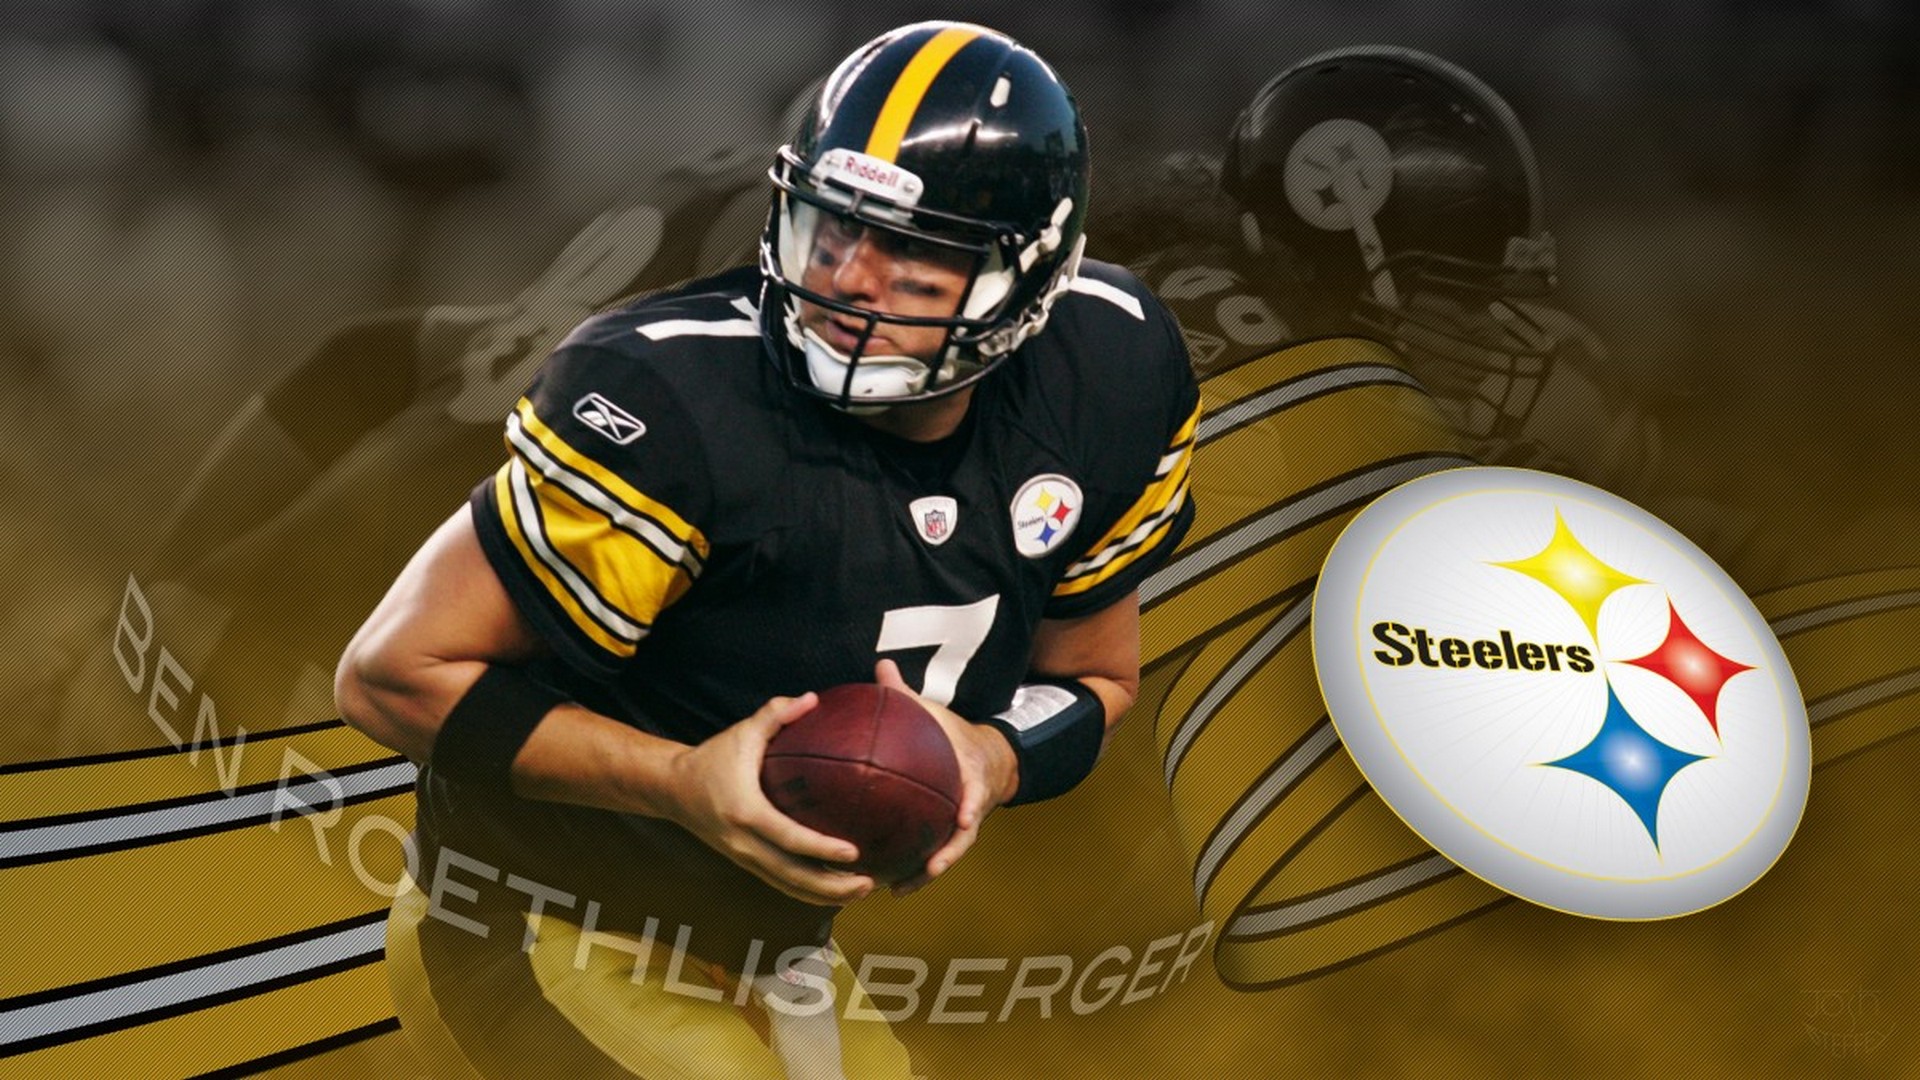 Wallpapers HD Pittsburgh Steelers Football with resolution 1920x1080 pixel. You can make this wallpaper for your Mac or Windows Desktop Background, iPhone, Android or Tablet and another Smartphone device